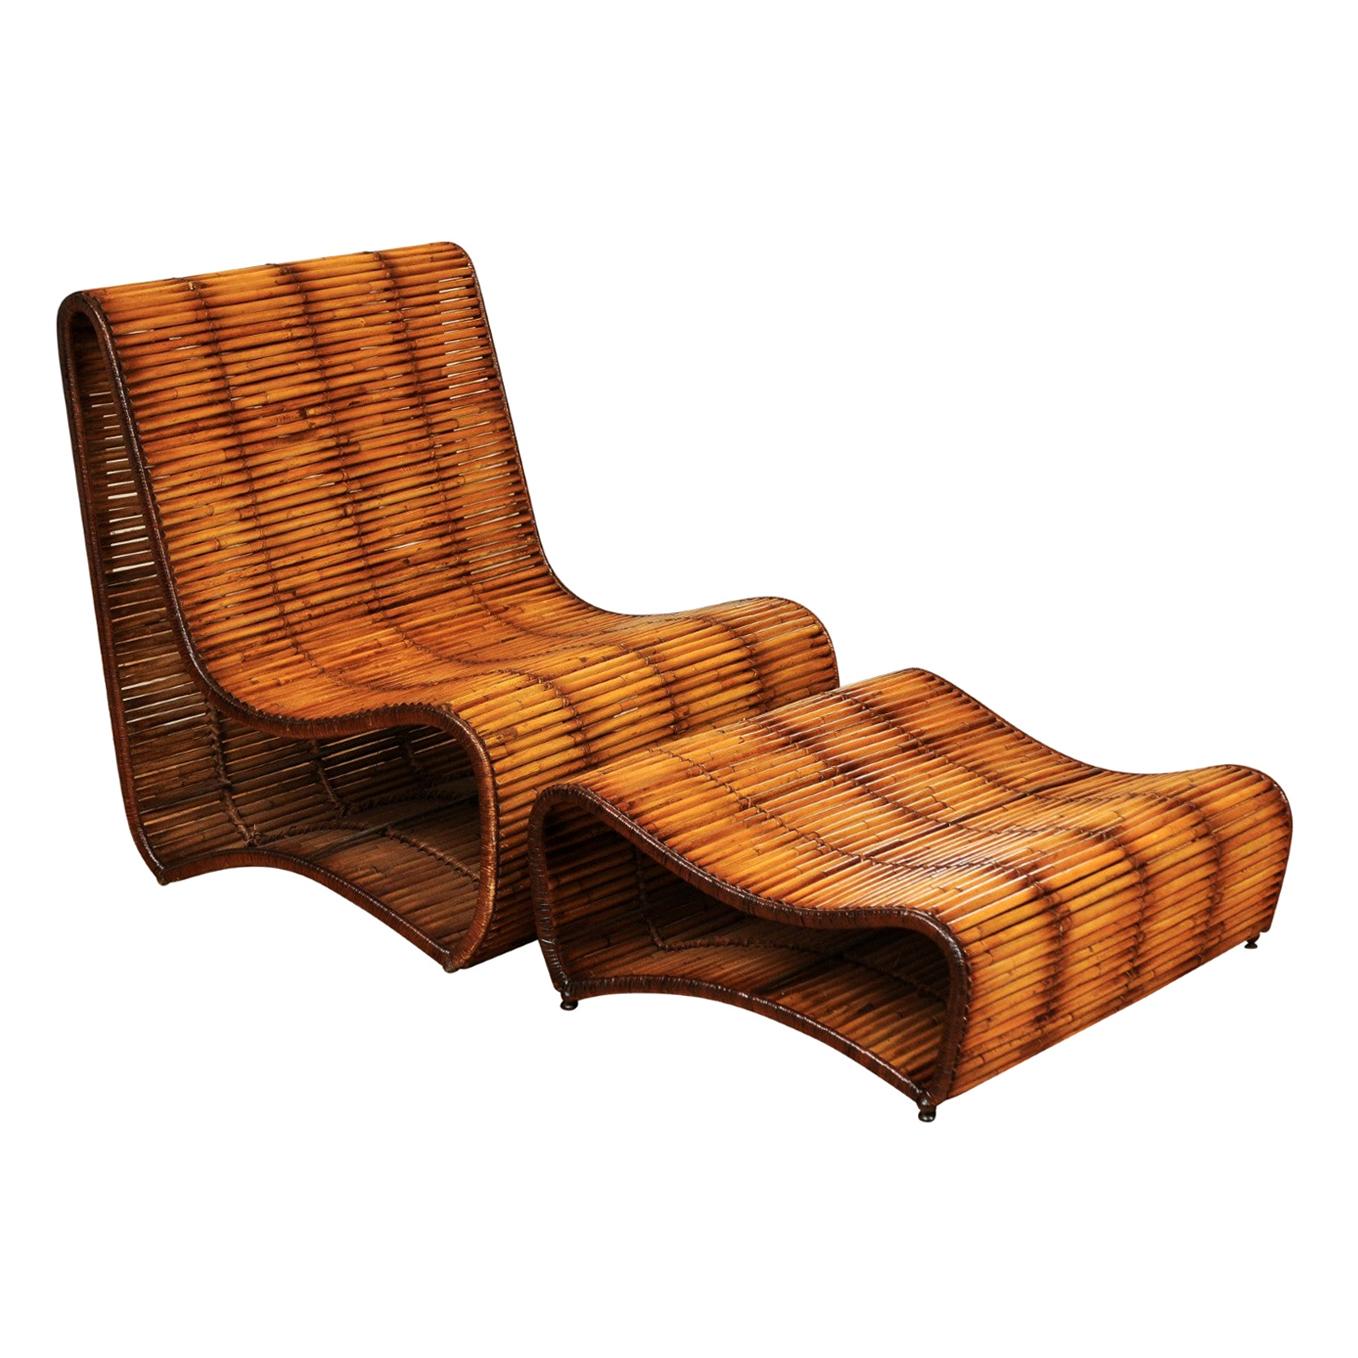 Incredible Wave Slipper Lounge Chair and Ottoman by Danny Ho Fong, circa 1970